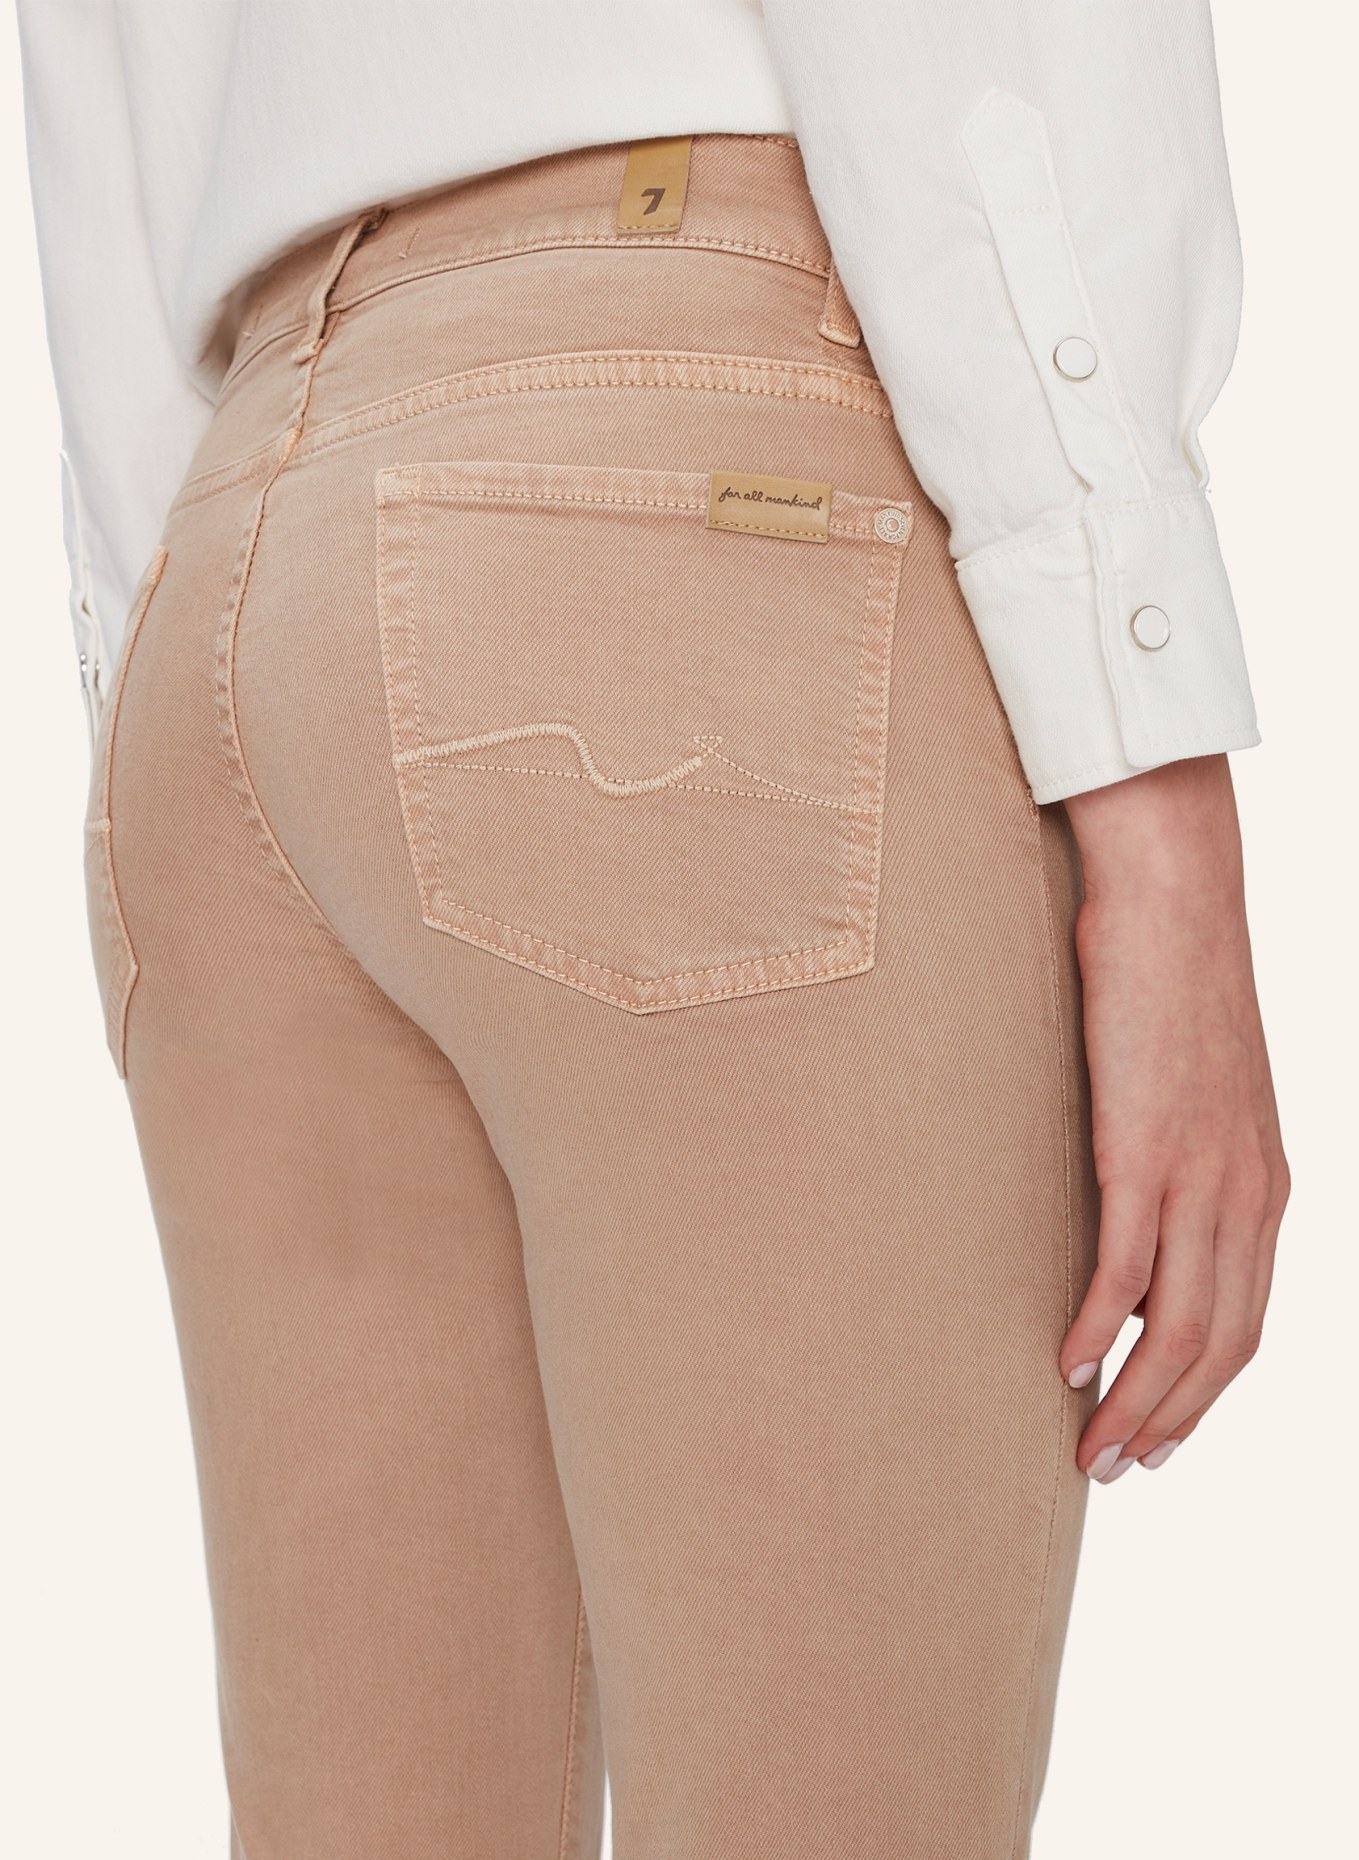 7 for all mankind Pants  ROXANNE ANKLE Slim Fit, Farbe: BEIGE (Bild 4)